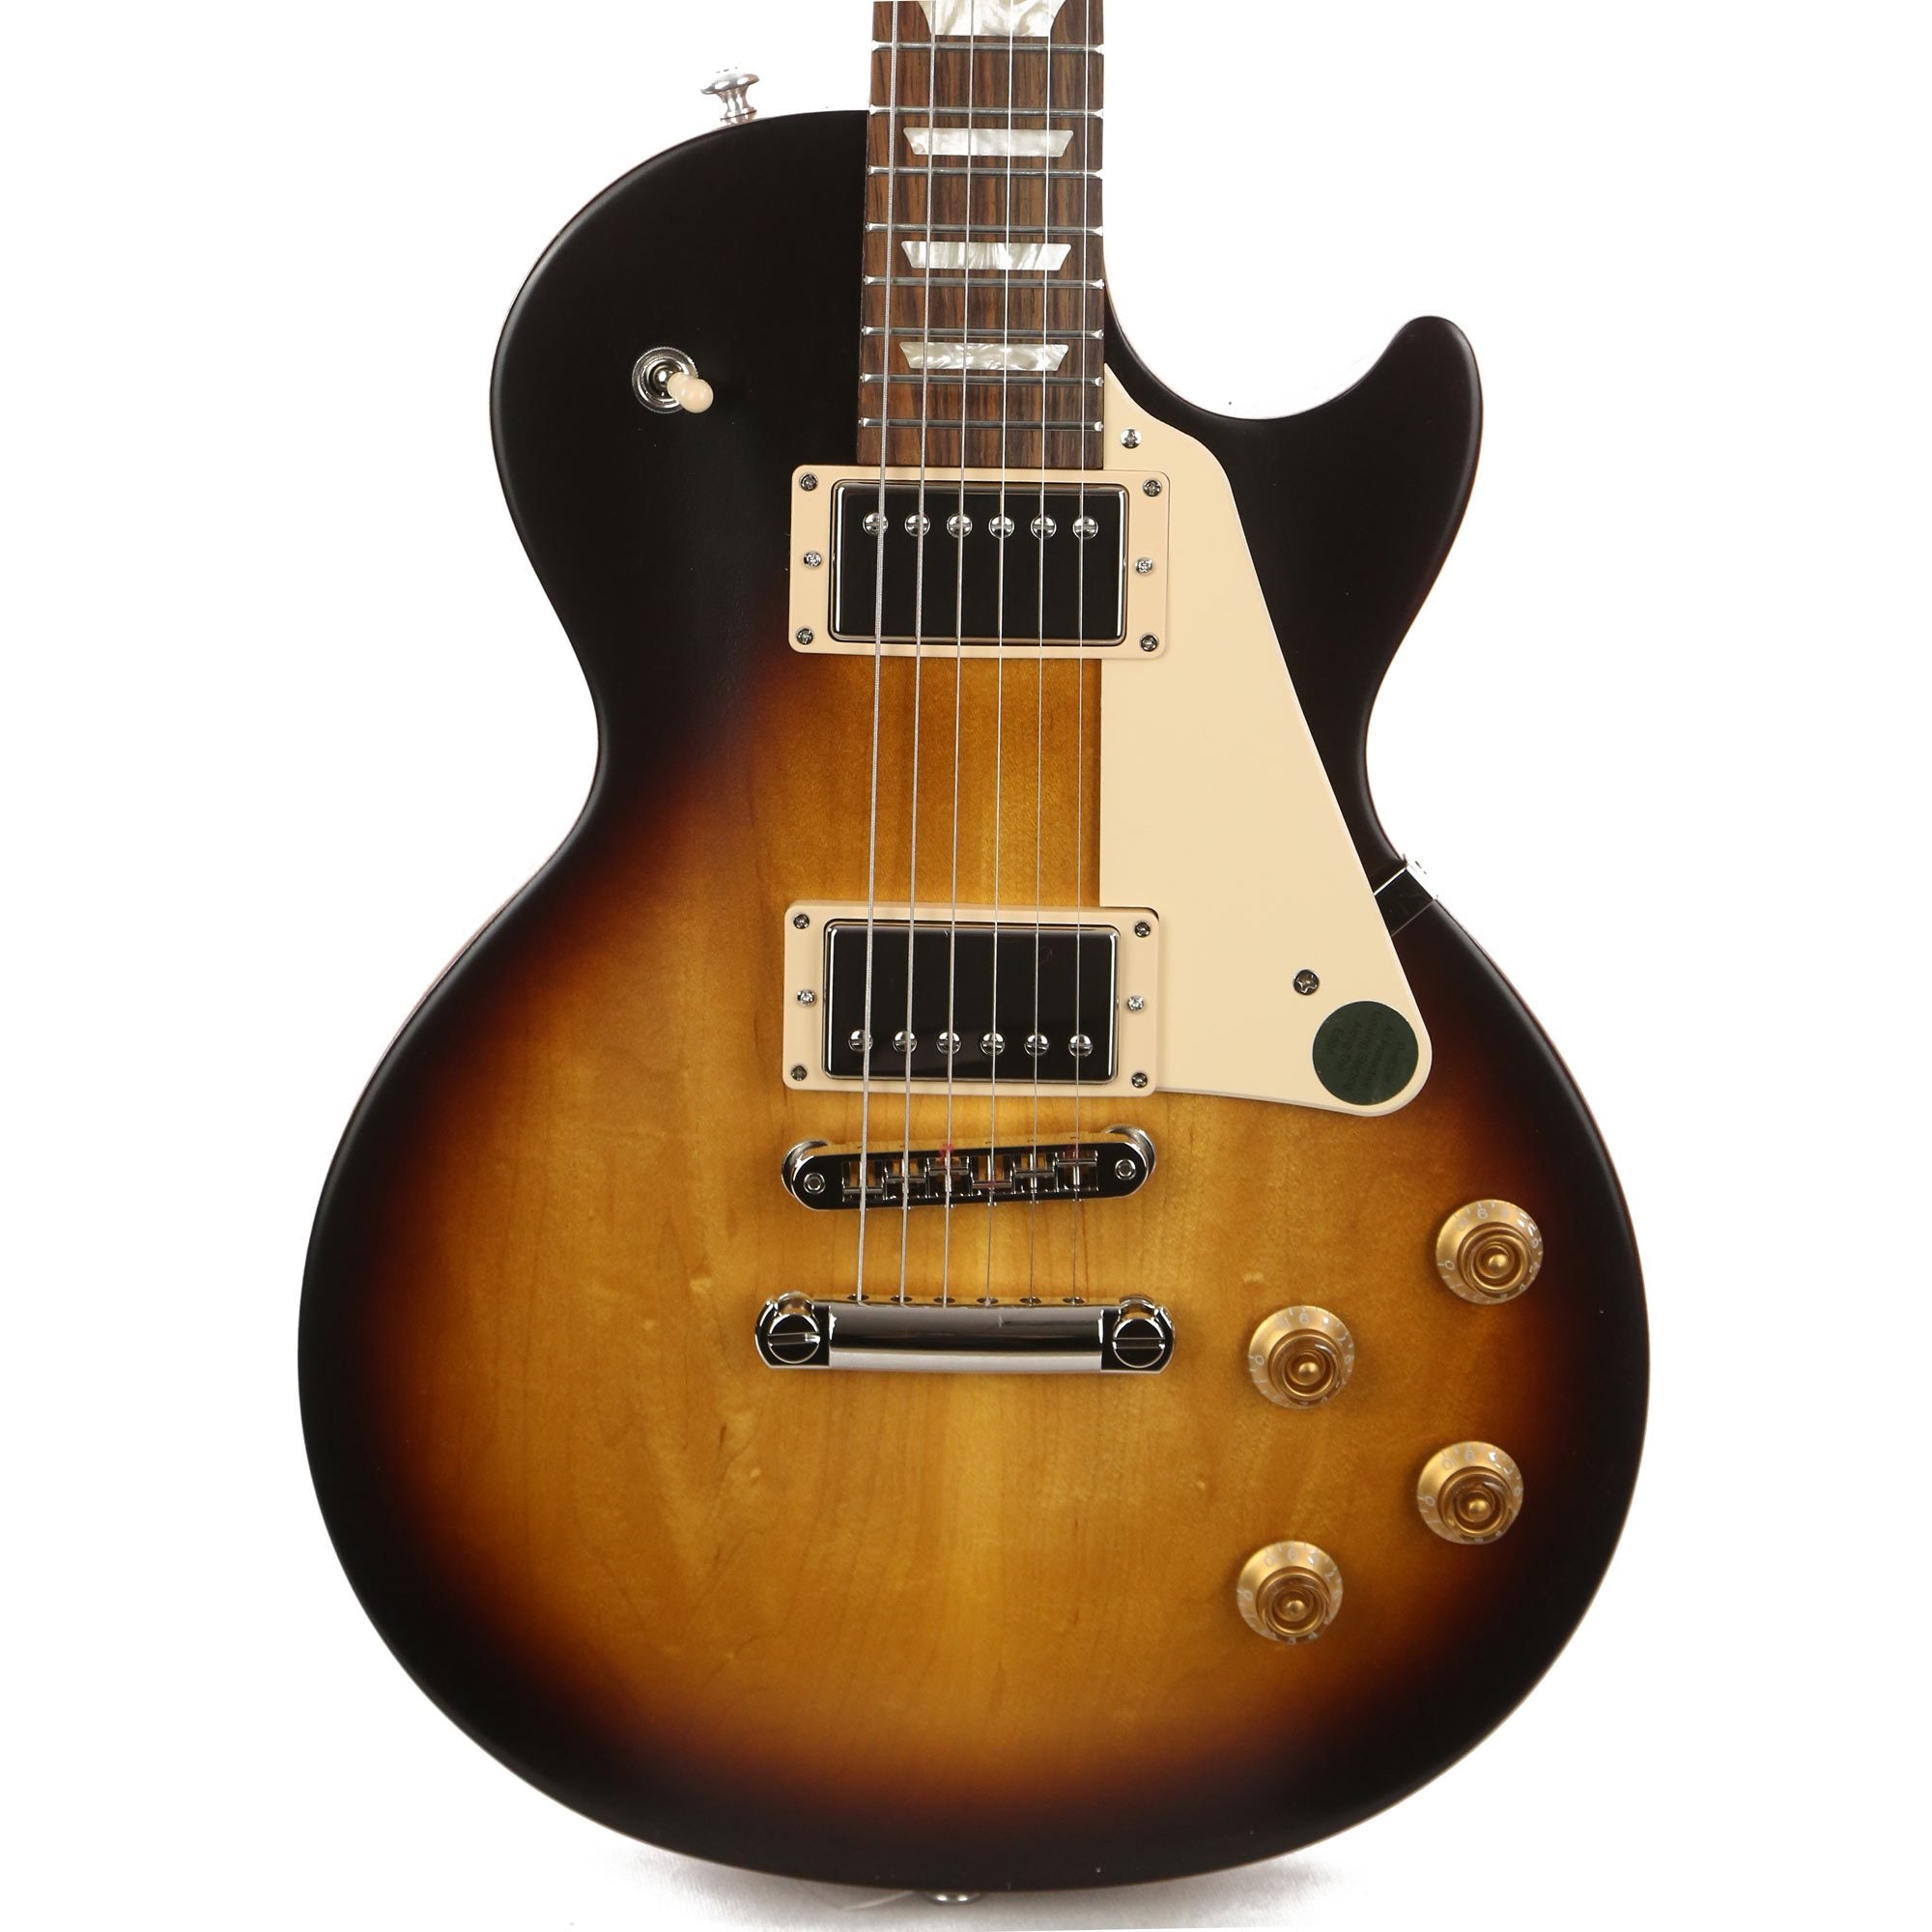 Gibson Les Paul Tribute Satin Tobacco Burst Used | The Music Zoo